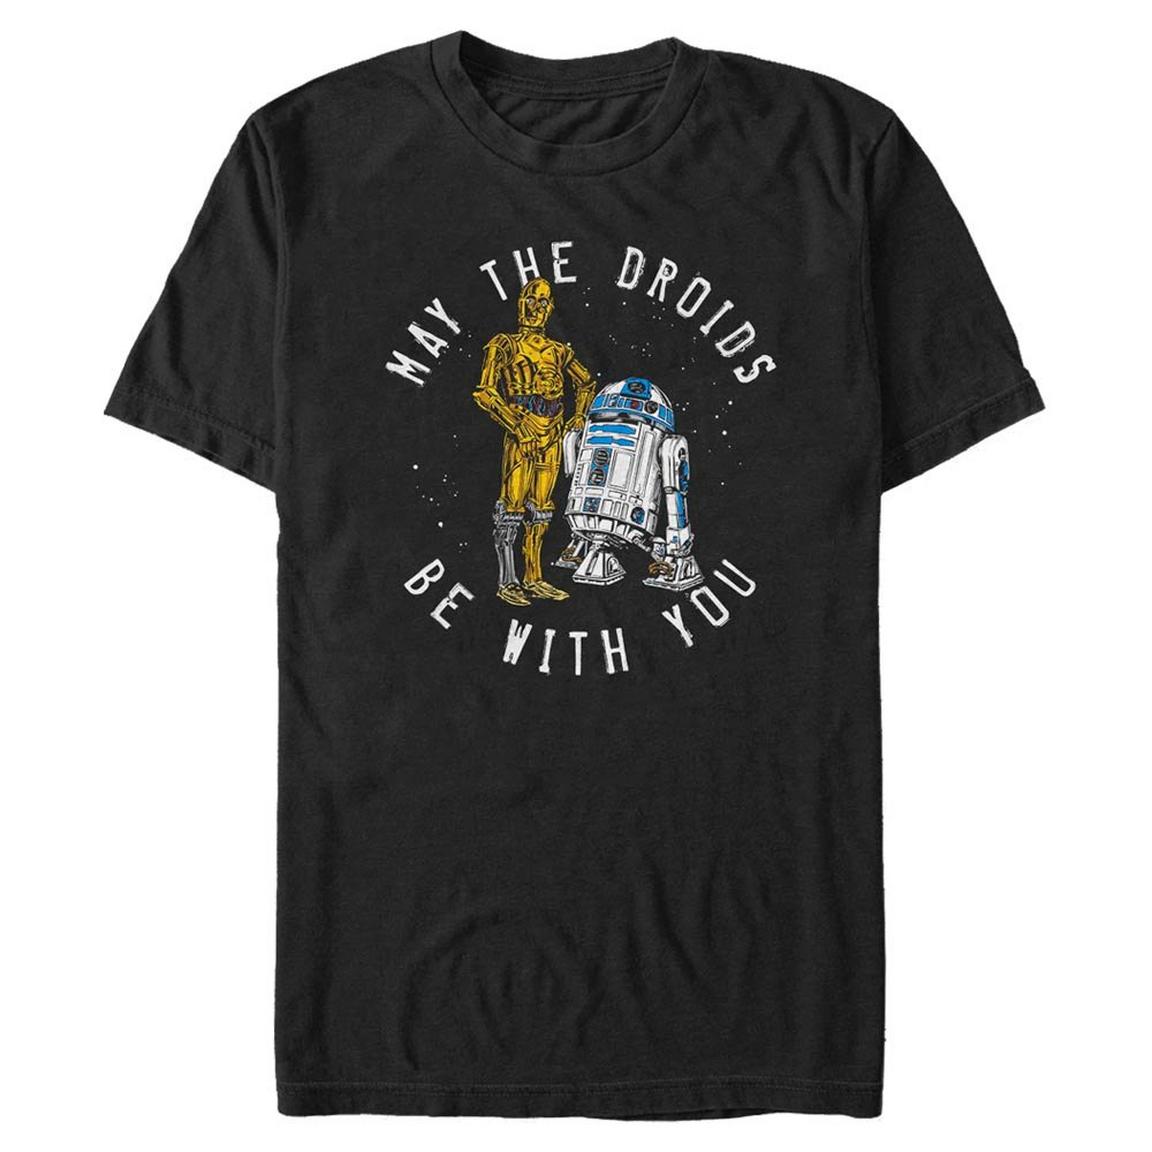 Star Wars R2-D2 and C-3PO May the Droids Be With You Unisex T-Shirt, Size: Medium, Fifth Sun -  STRW3882-10001004